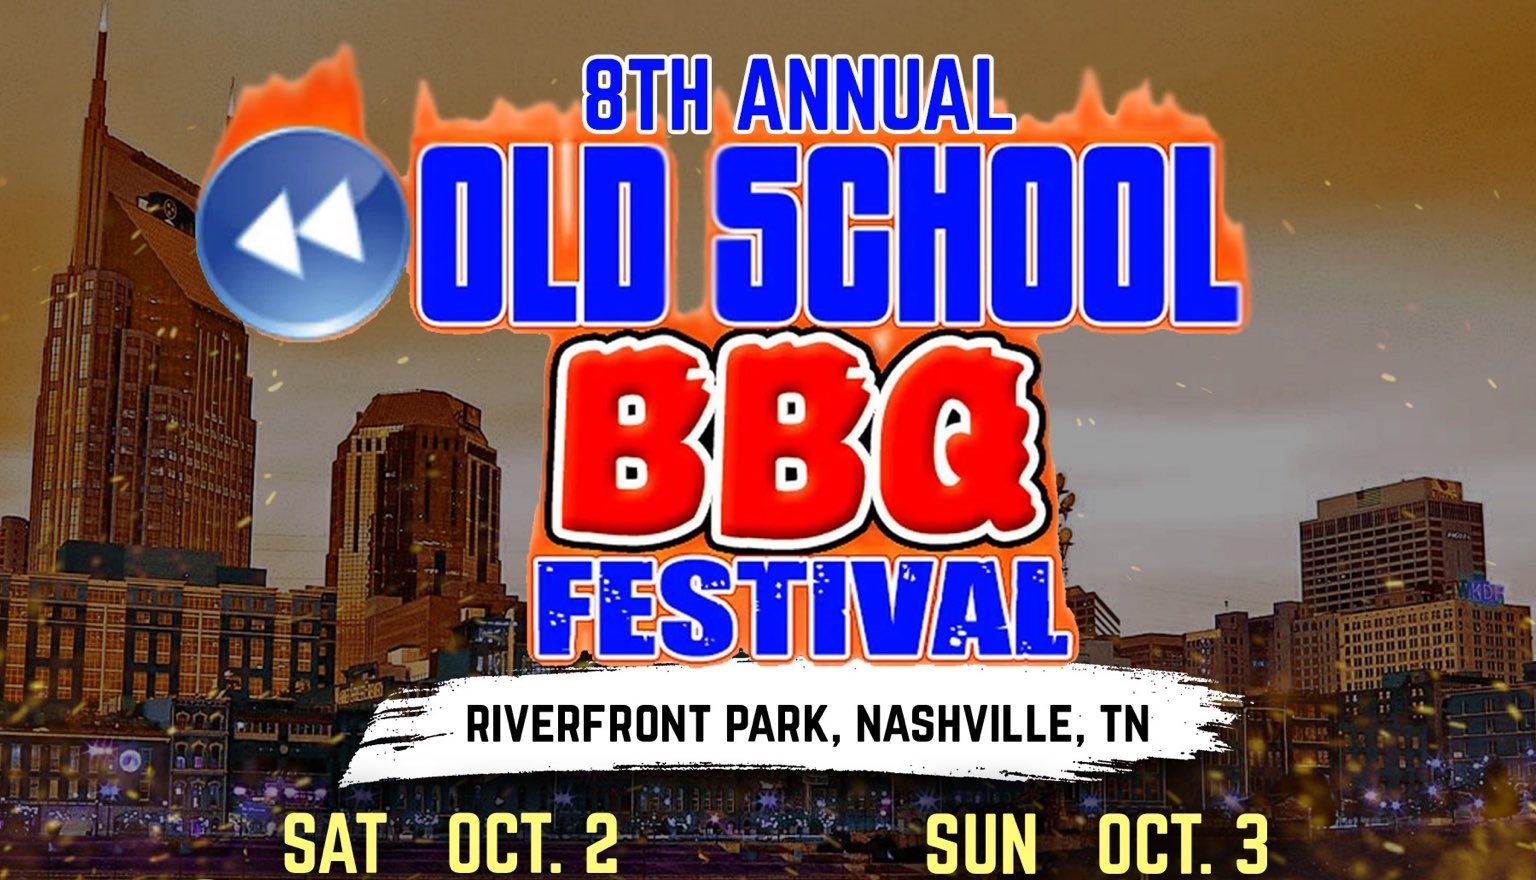 <h1 class="tribe-events-single-event-title">8TH ANNUAL OLD SCHOOL R&B FESTIVAL</h1>